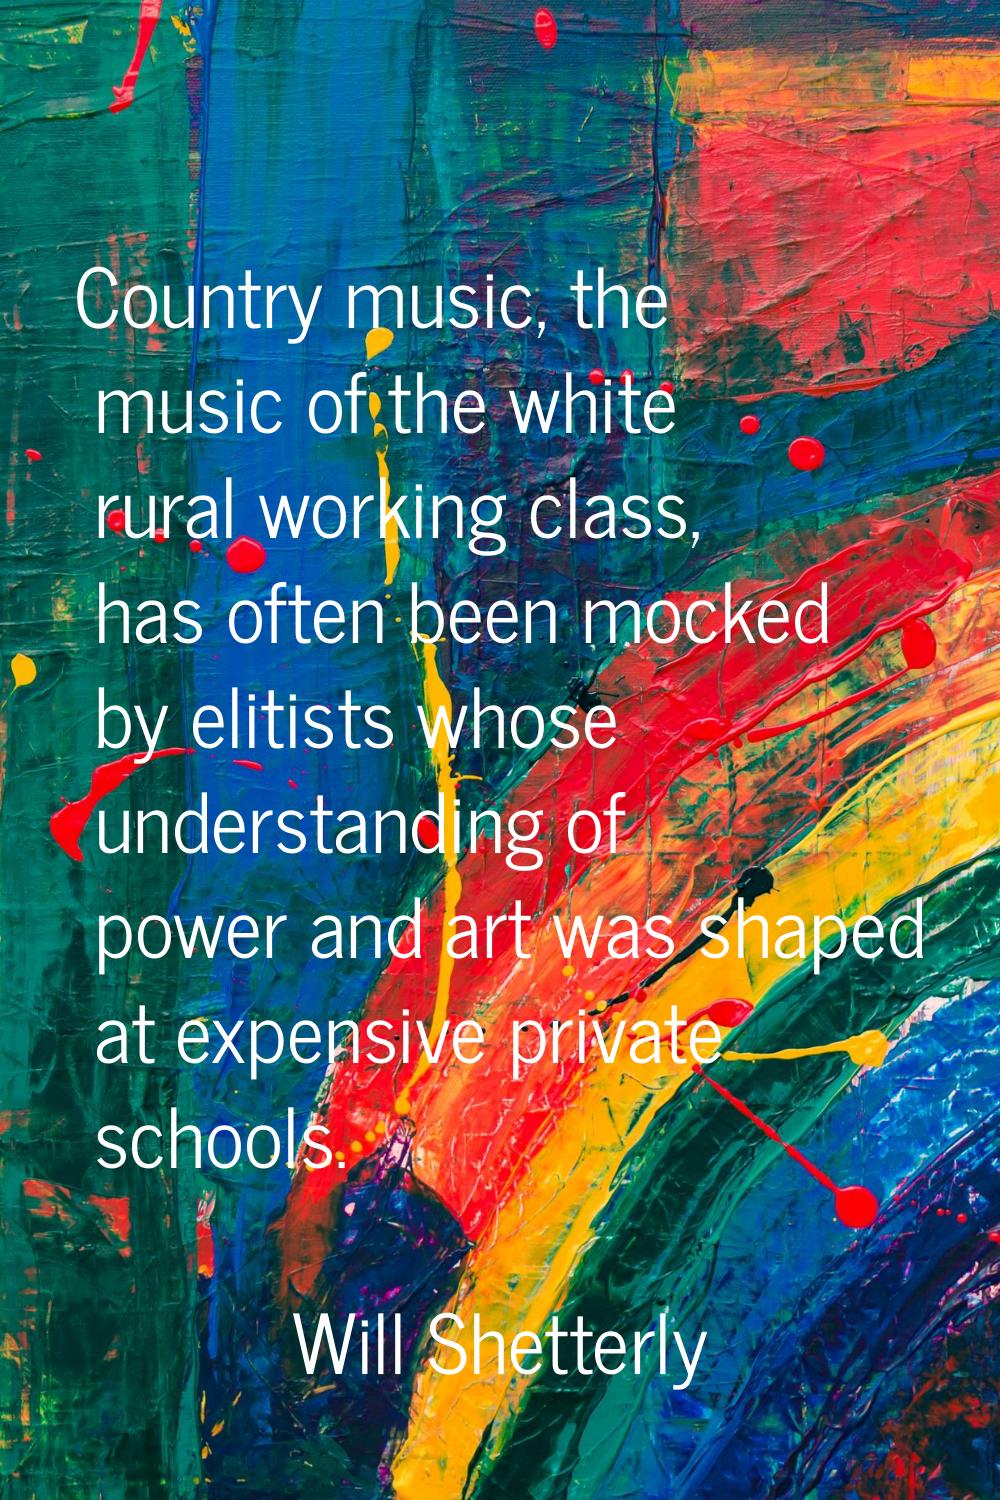 Country music, the music of the white rural working class, has often been mocked by elitists whose 